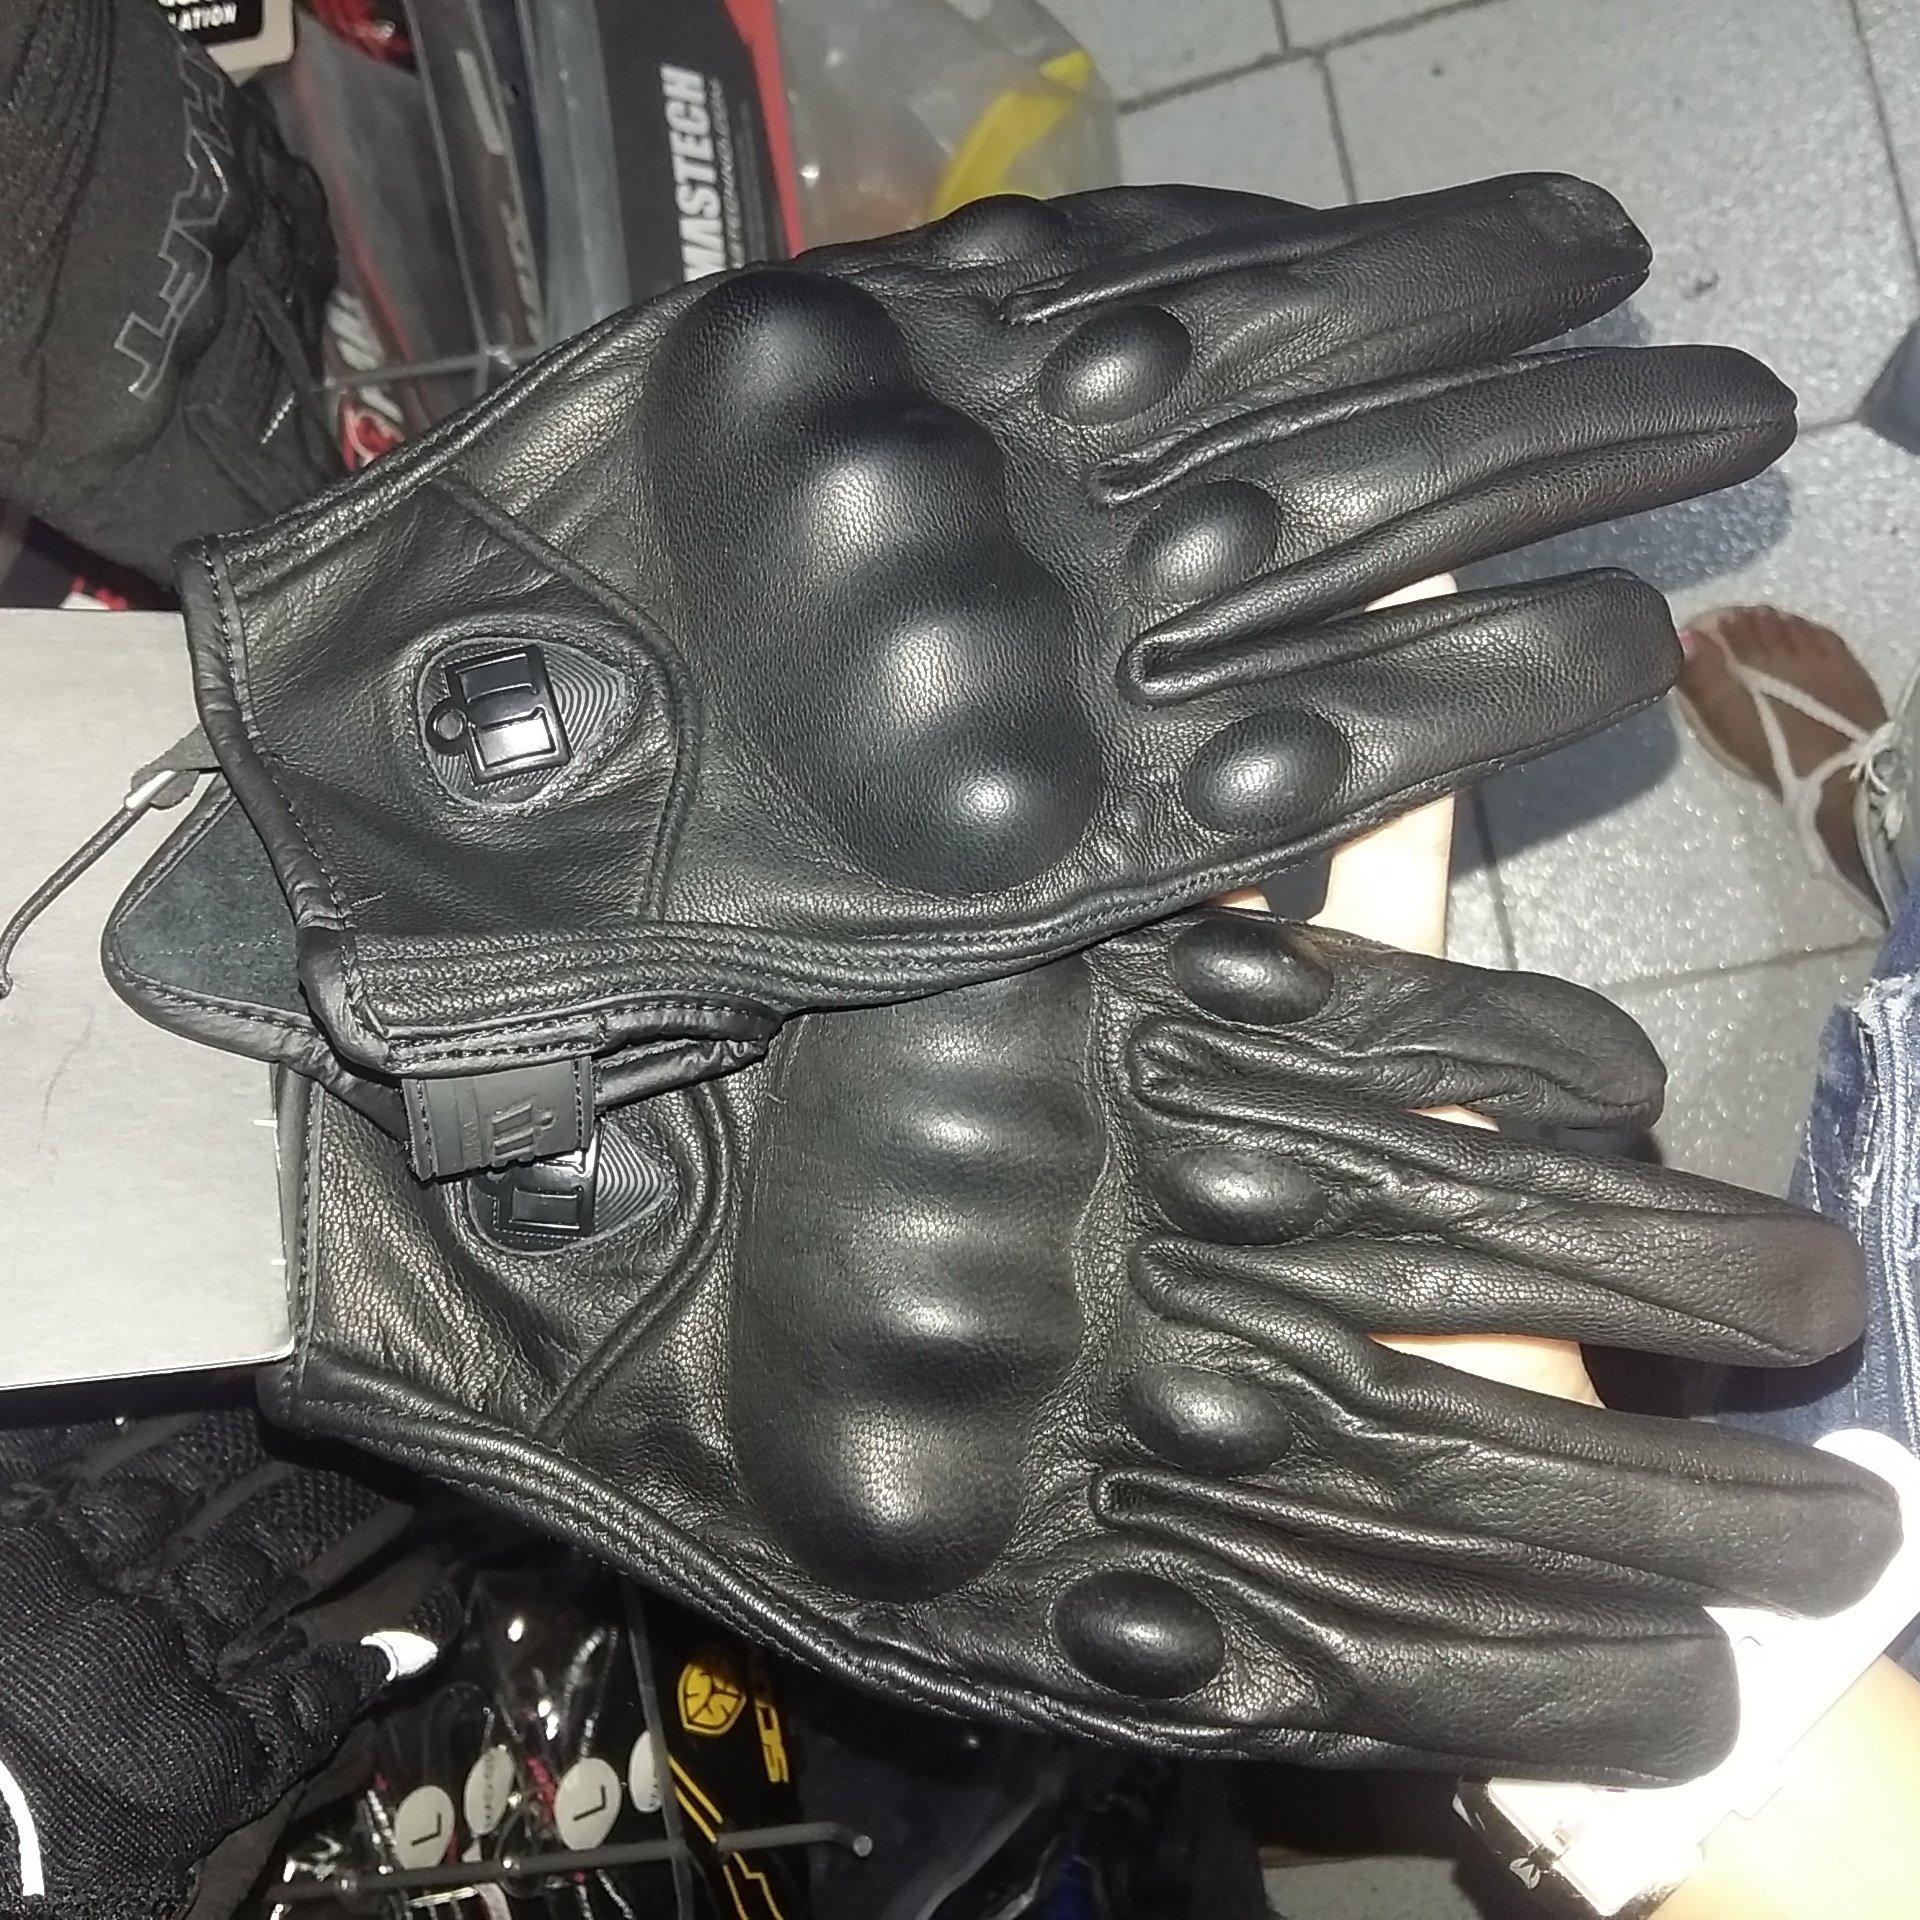 MX Zone Store på Twitter: "Guantes Icon Pursuit 100% Originales Disponible talla M y L 📞 (2) 🚚 Envíos a todo Colombia #icon #moteros #cali #colombia #bike https://t.co/ZNY6auf0Ut" / Twitter